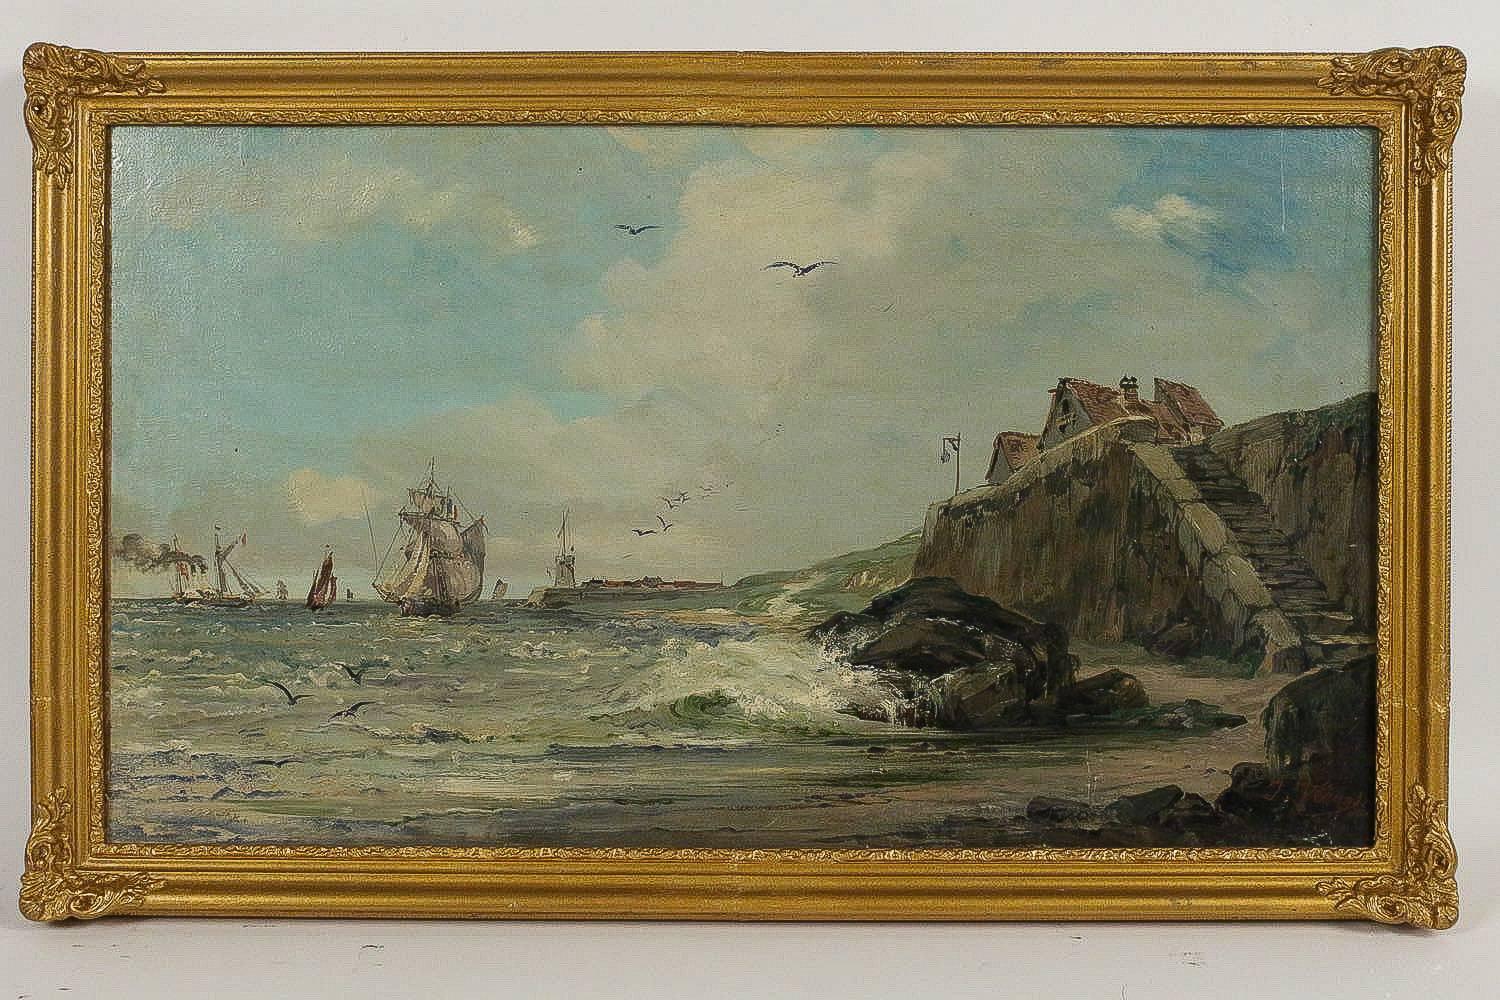 A lovely scene of Navy, oil on canvas signed on a lower right by the French marine painter, Jules Véron-Faré.
It is a mature and excellent quality work by this Master marine painter, circa 1880.

Paintings evaluated by the office of 